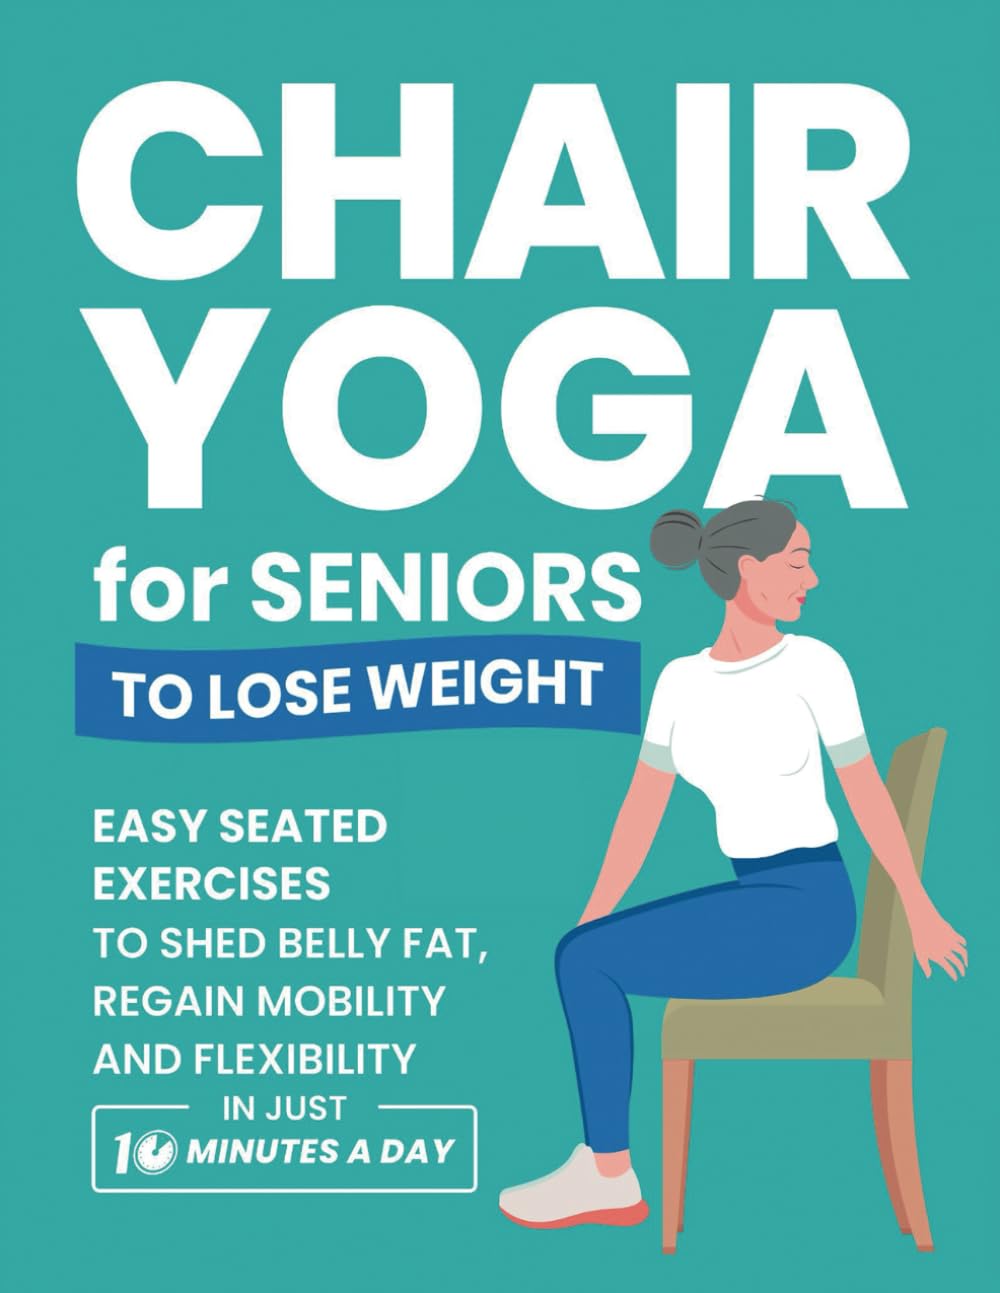 Chair Yoga for Seniors to Lose Weight: Easy Seated Exercises to Shed Belly Fat, Regain Mobility and Flexibility in Just 10 Minutes a Day (Strength Training for Seniors Series)